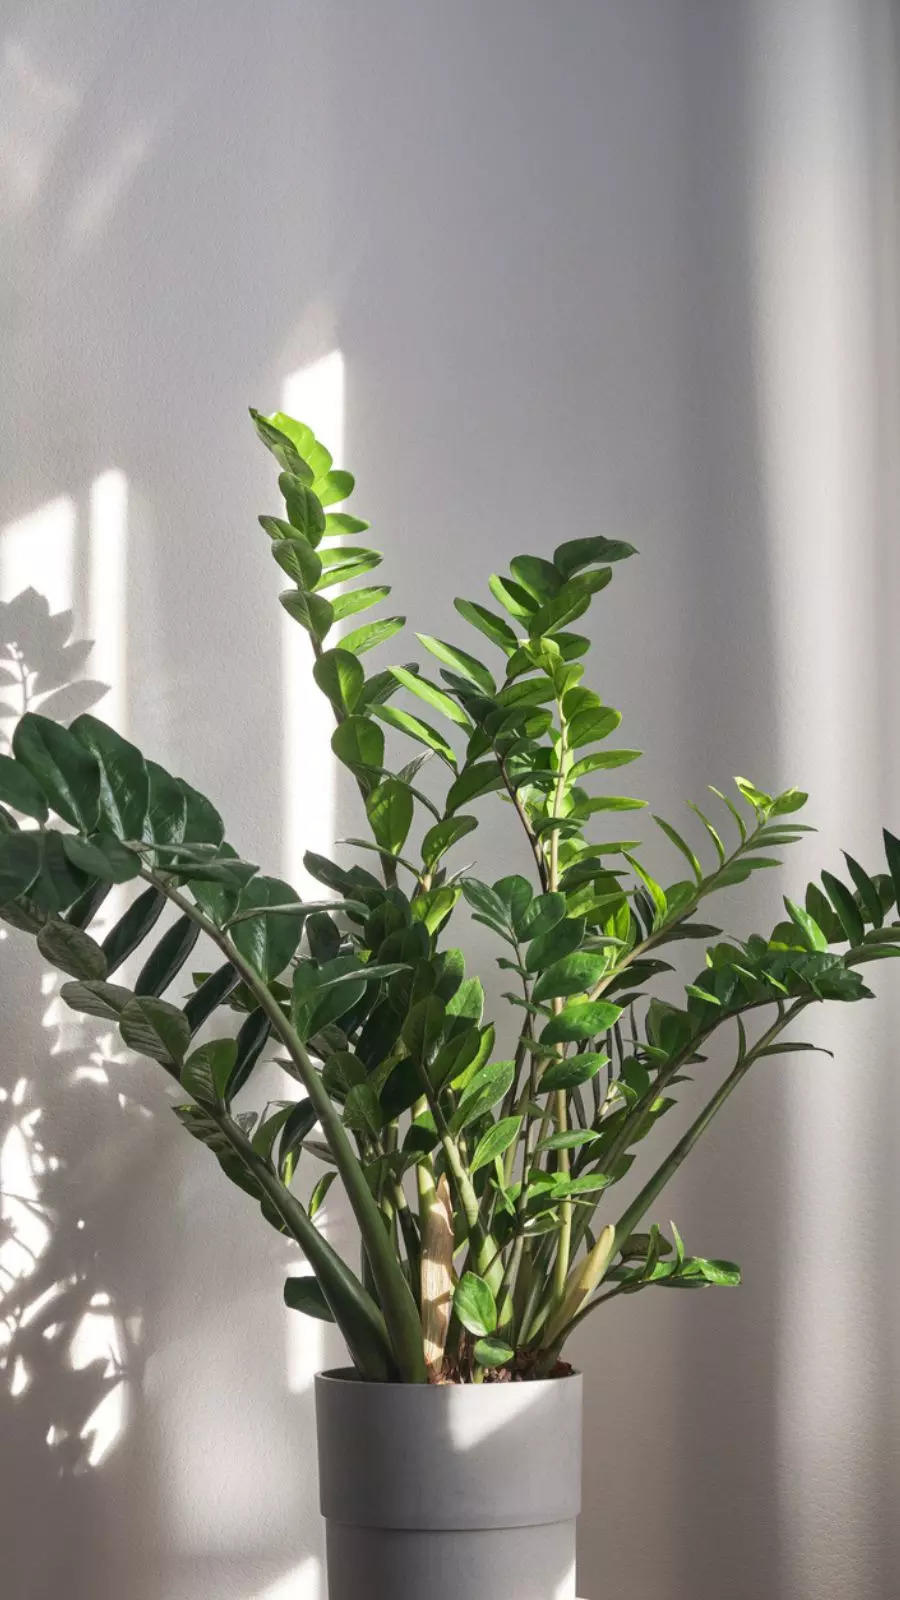 How to take care of ZZ plant in summer?